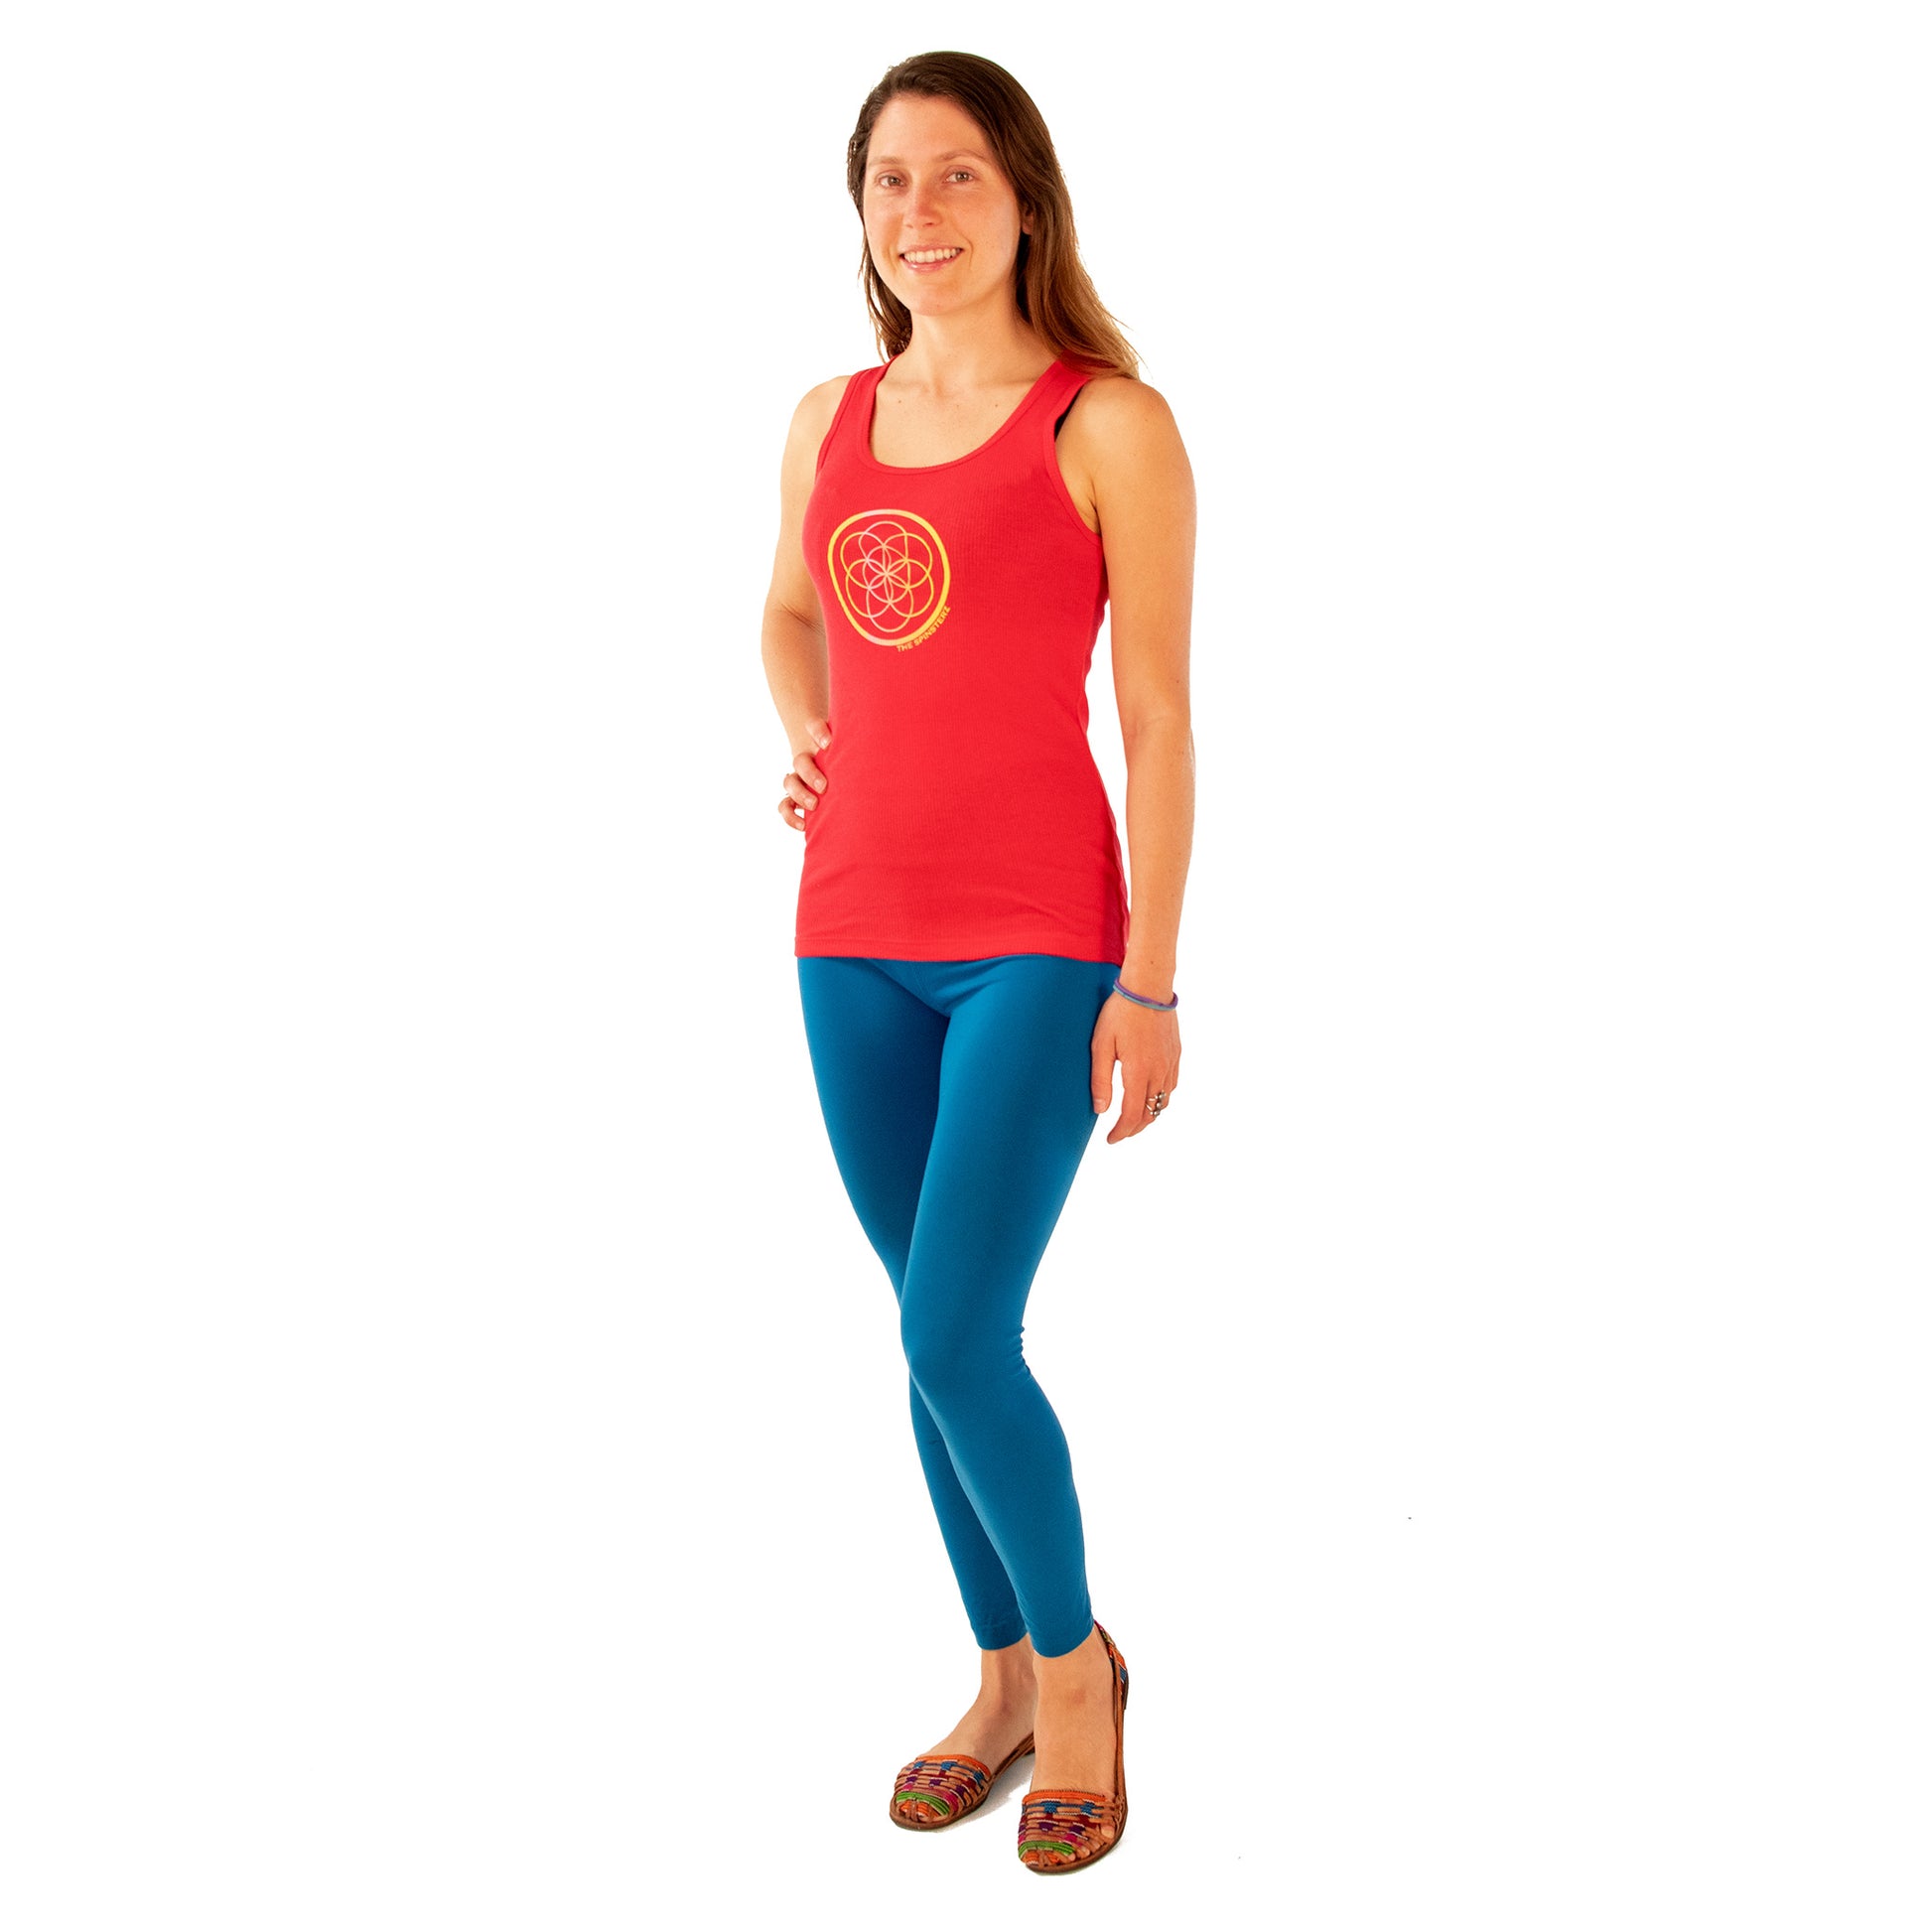 The Spinsterz - The Spinsterz Logo Tank Top